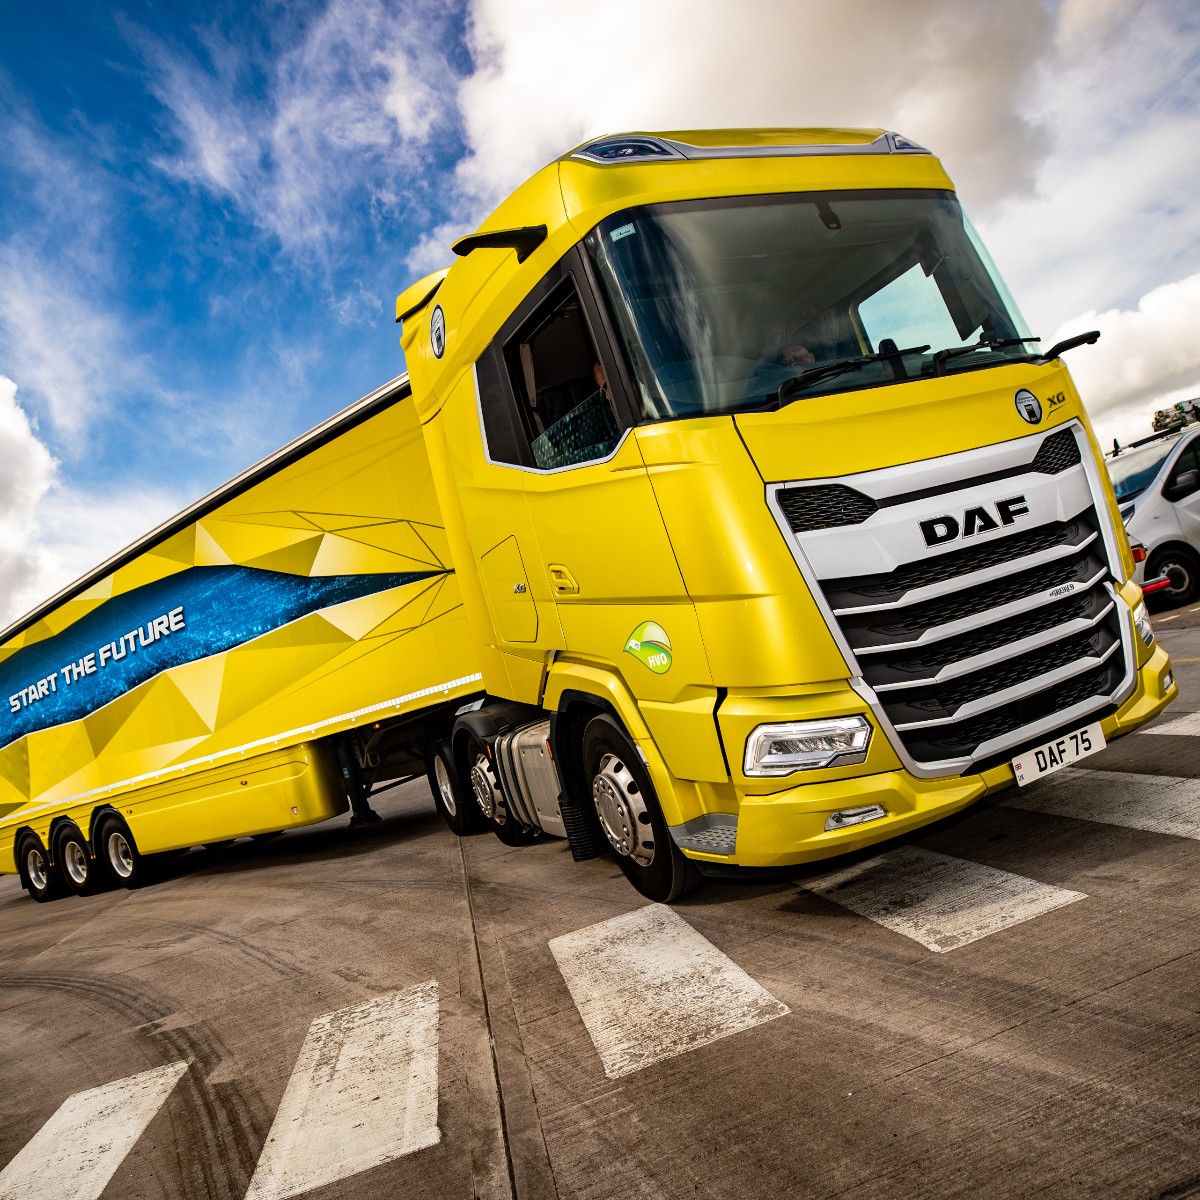 The UK & Ireland DAF Driver Challenge regionals kick off at @LothianDAF in Bathgate, Scotland this weekend and we're looking forward to seeing what local drivers have to offer.🚛💨 Registrations are still open for upcoming events across the UK: brnw.ch/21wIKO0 #Truckers